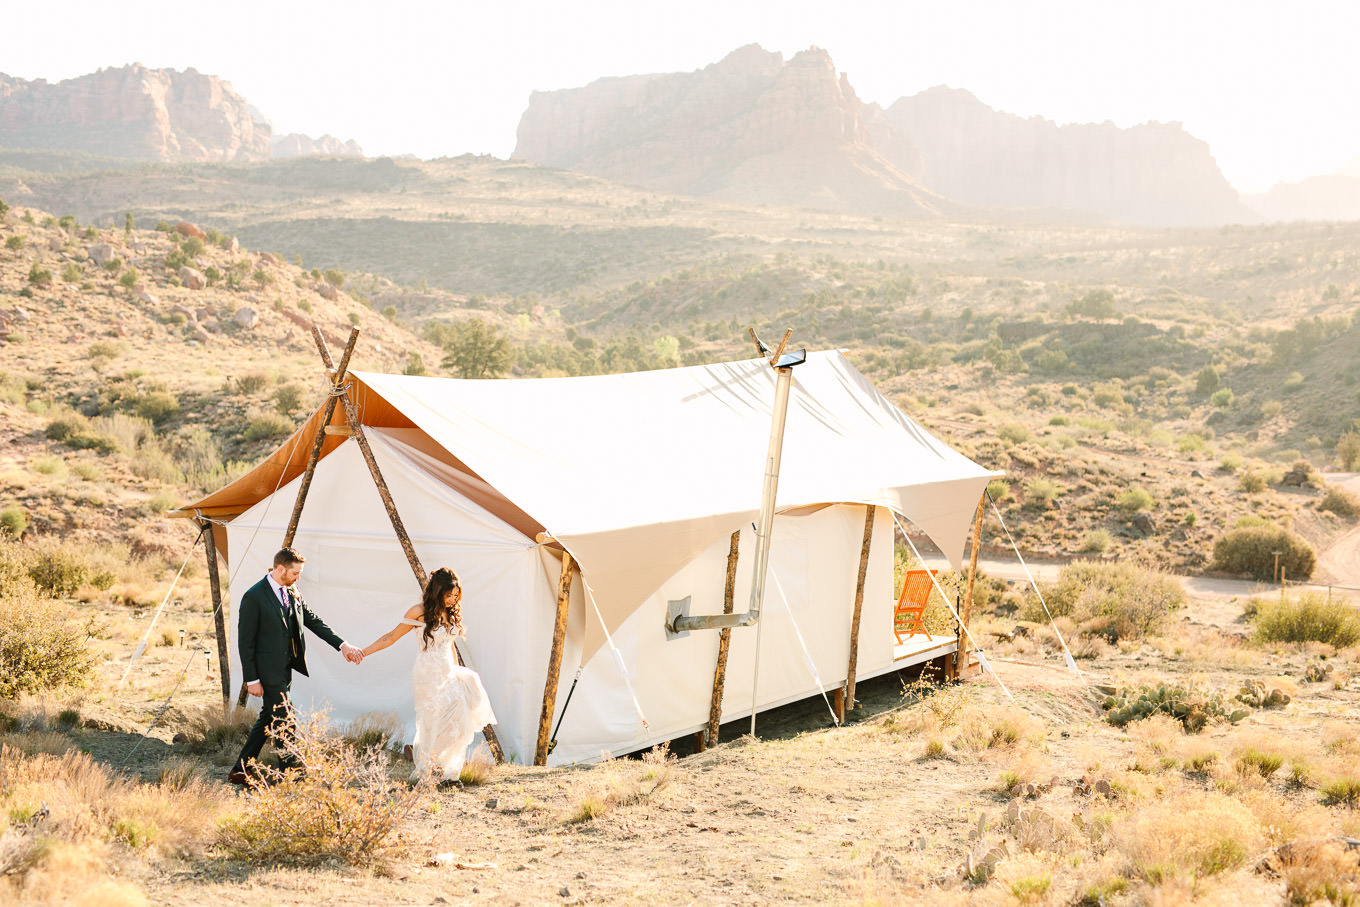 Bride and groom walking with tent | Zion Under Canvas Elopement at Sunrise | Colorful adventure elopement photography | #utahelopement #zionelopement #zionwedding #undercanvaszion #sunriseelopement  Source: Mary Costa Photography | Los Angeles